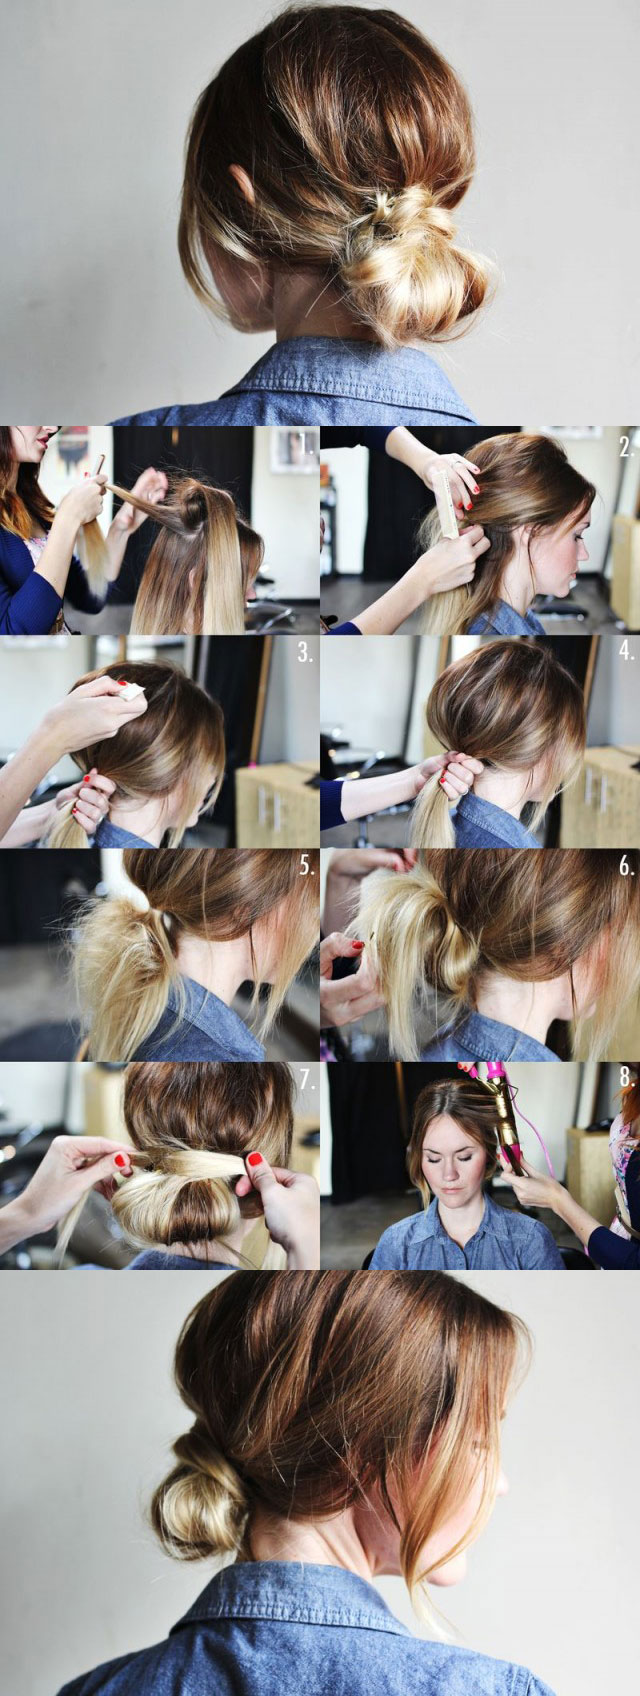 HOW TO STYLE A LOW BUN